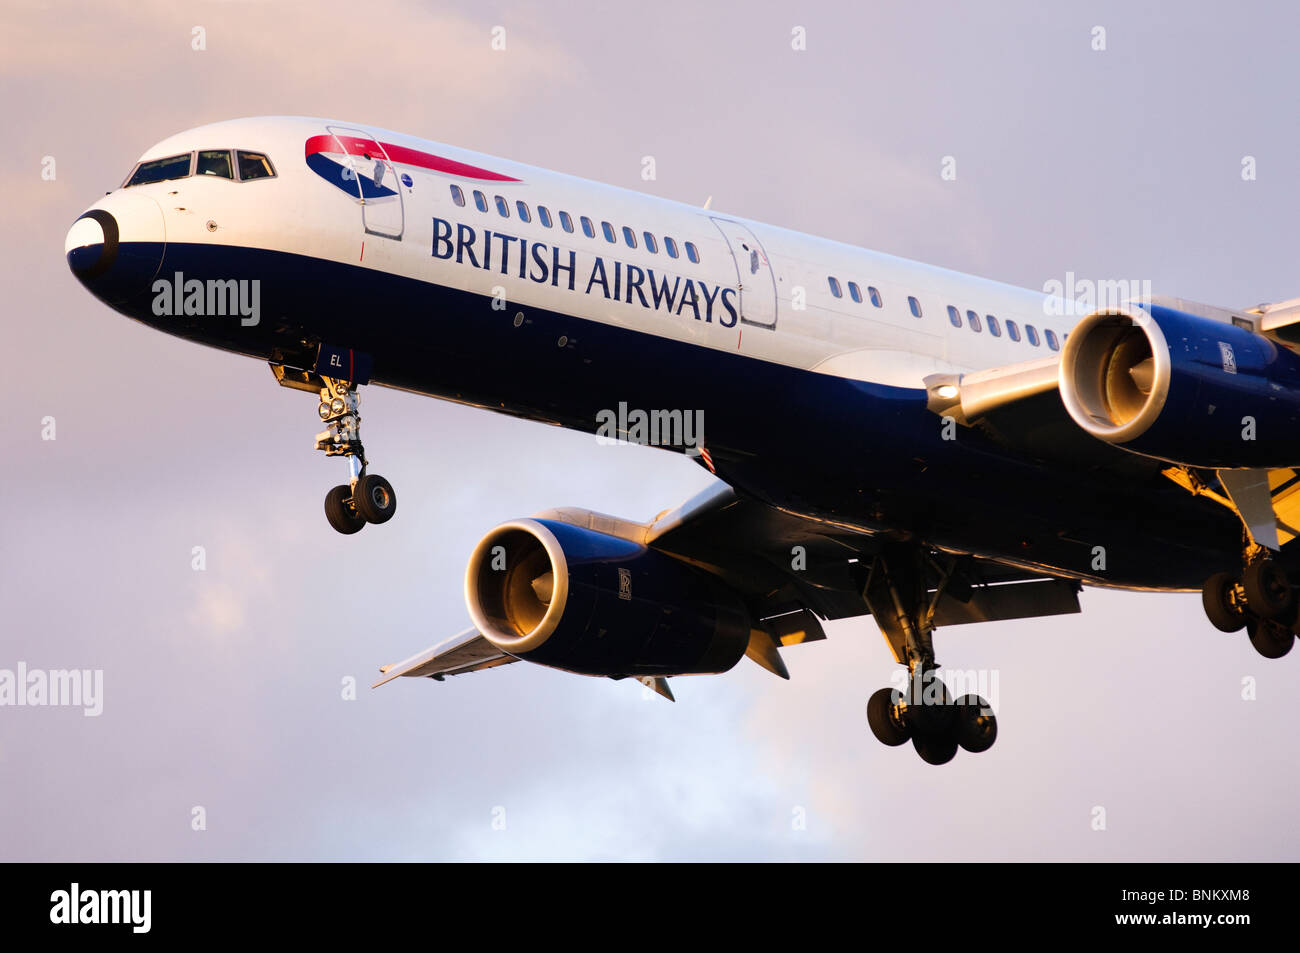 Boeing 757 operated by British Airways on approach for landing at London Heathrow Airport, UK. Stock Photo